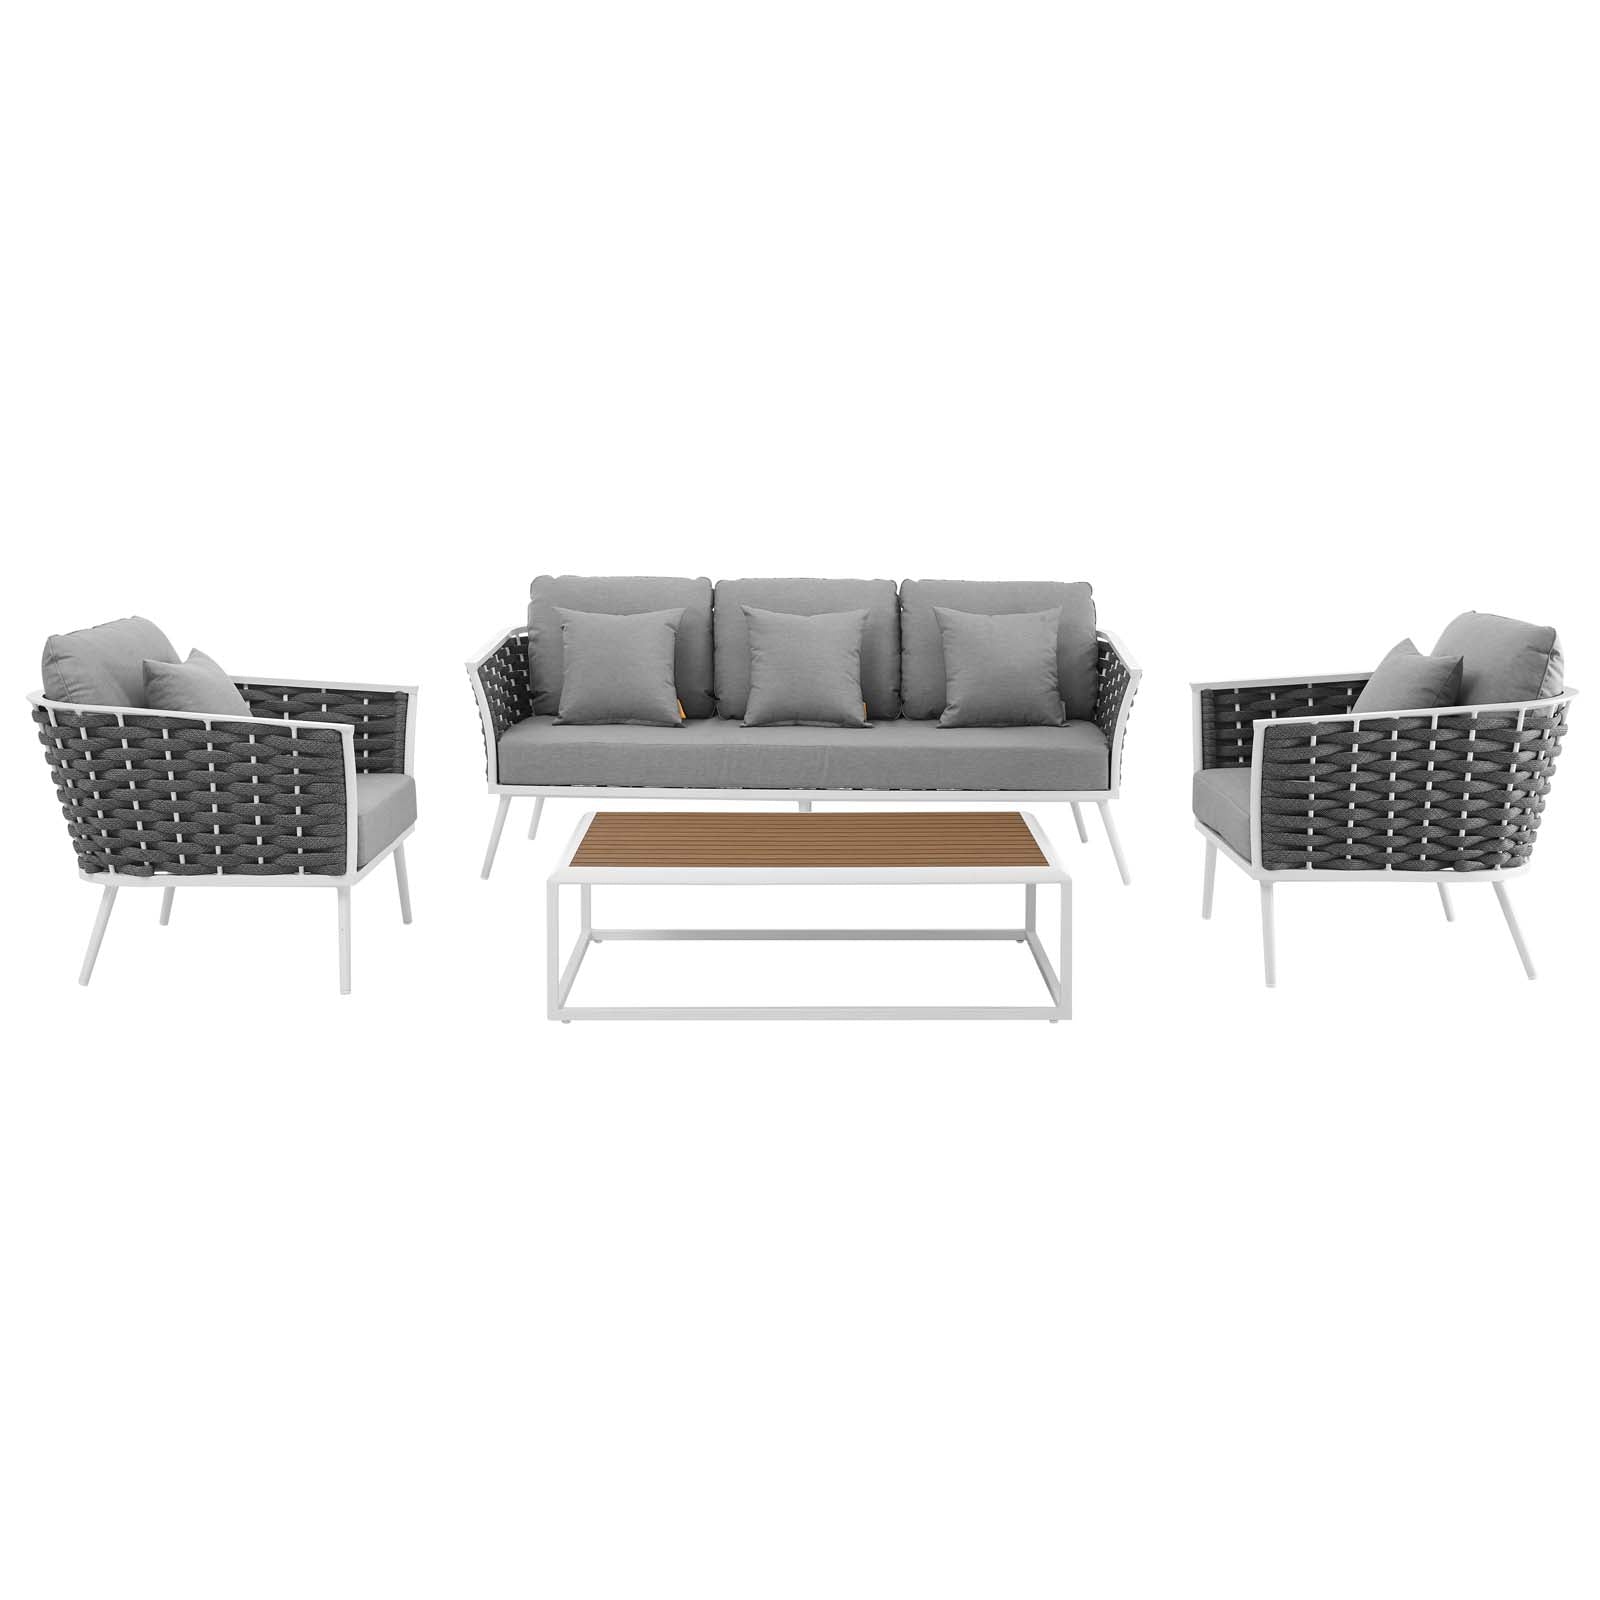 Stance 4 Piece Outdoor 107.5"W & 31.5 H Patio Aluminum Sectional Sofa Set White